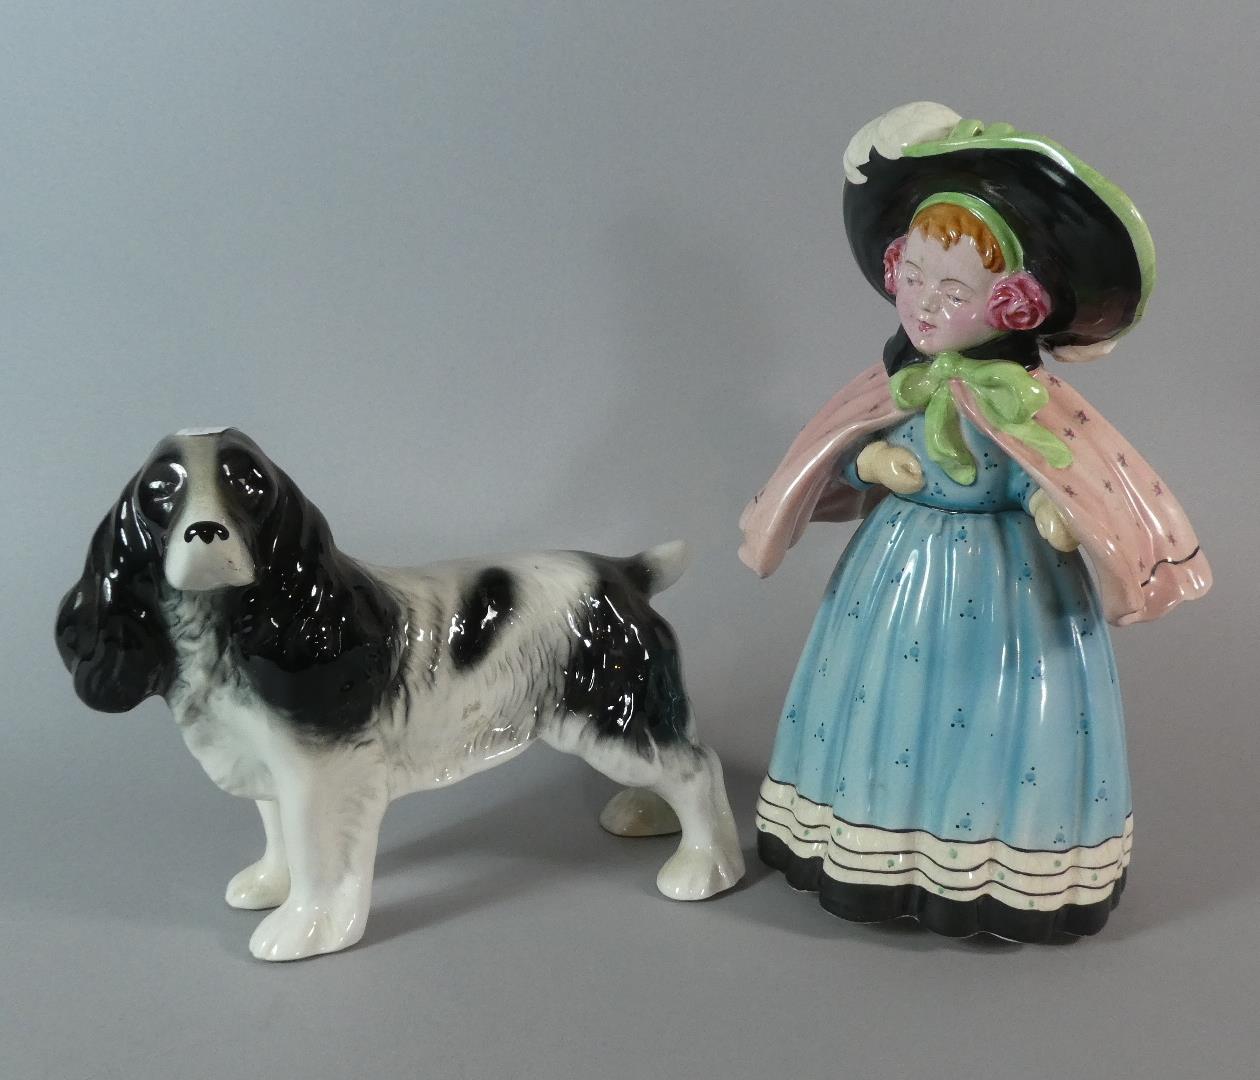 A Fieldings Devon Ware Figure of Girl with Cape and Bonnet Together with a Melbaware Spaniel